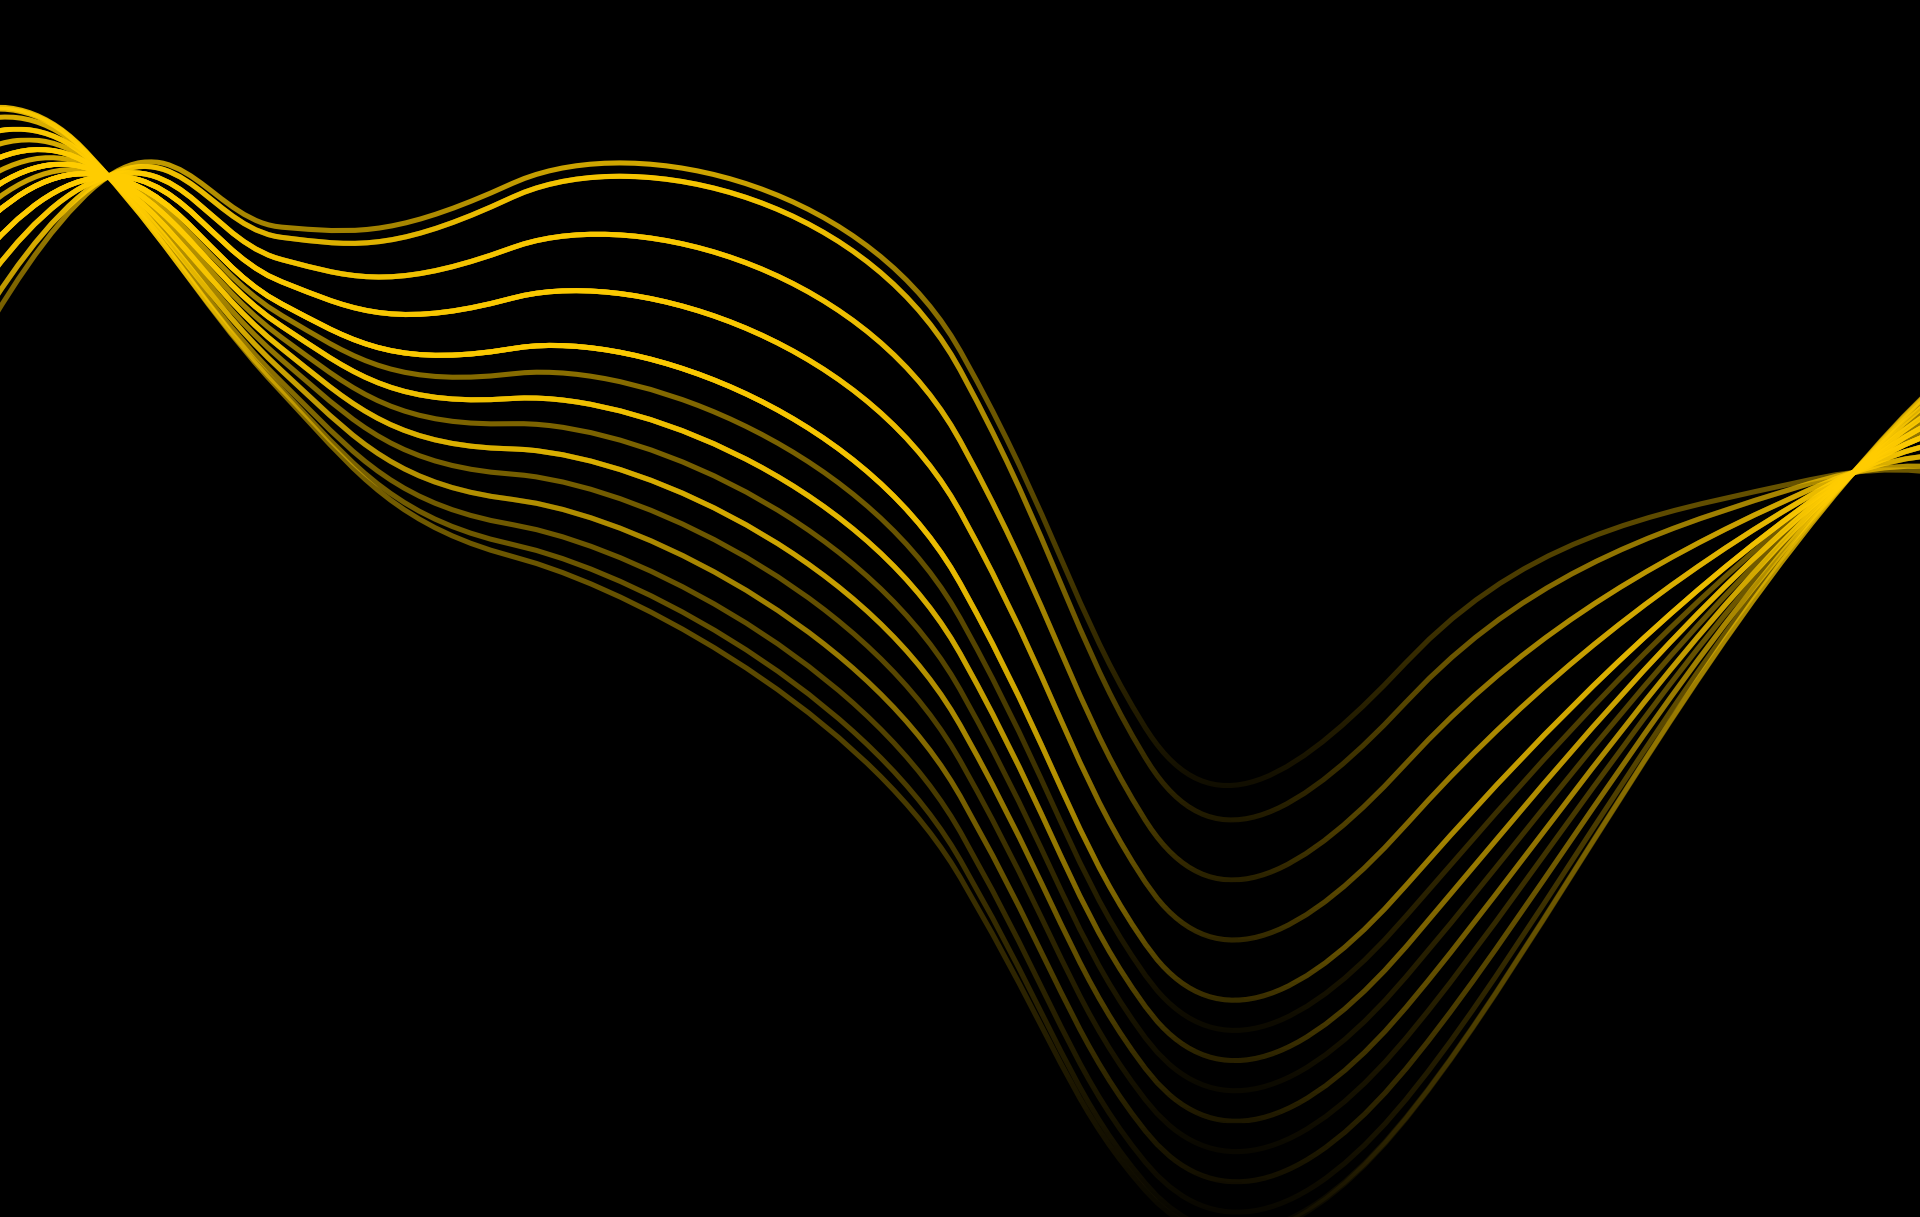 Black background with yellow lines free image download